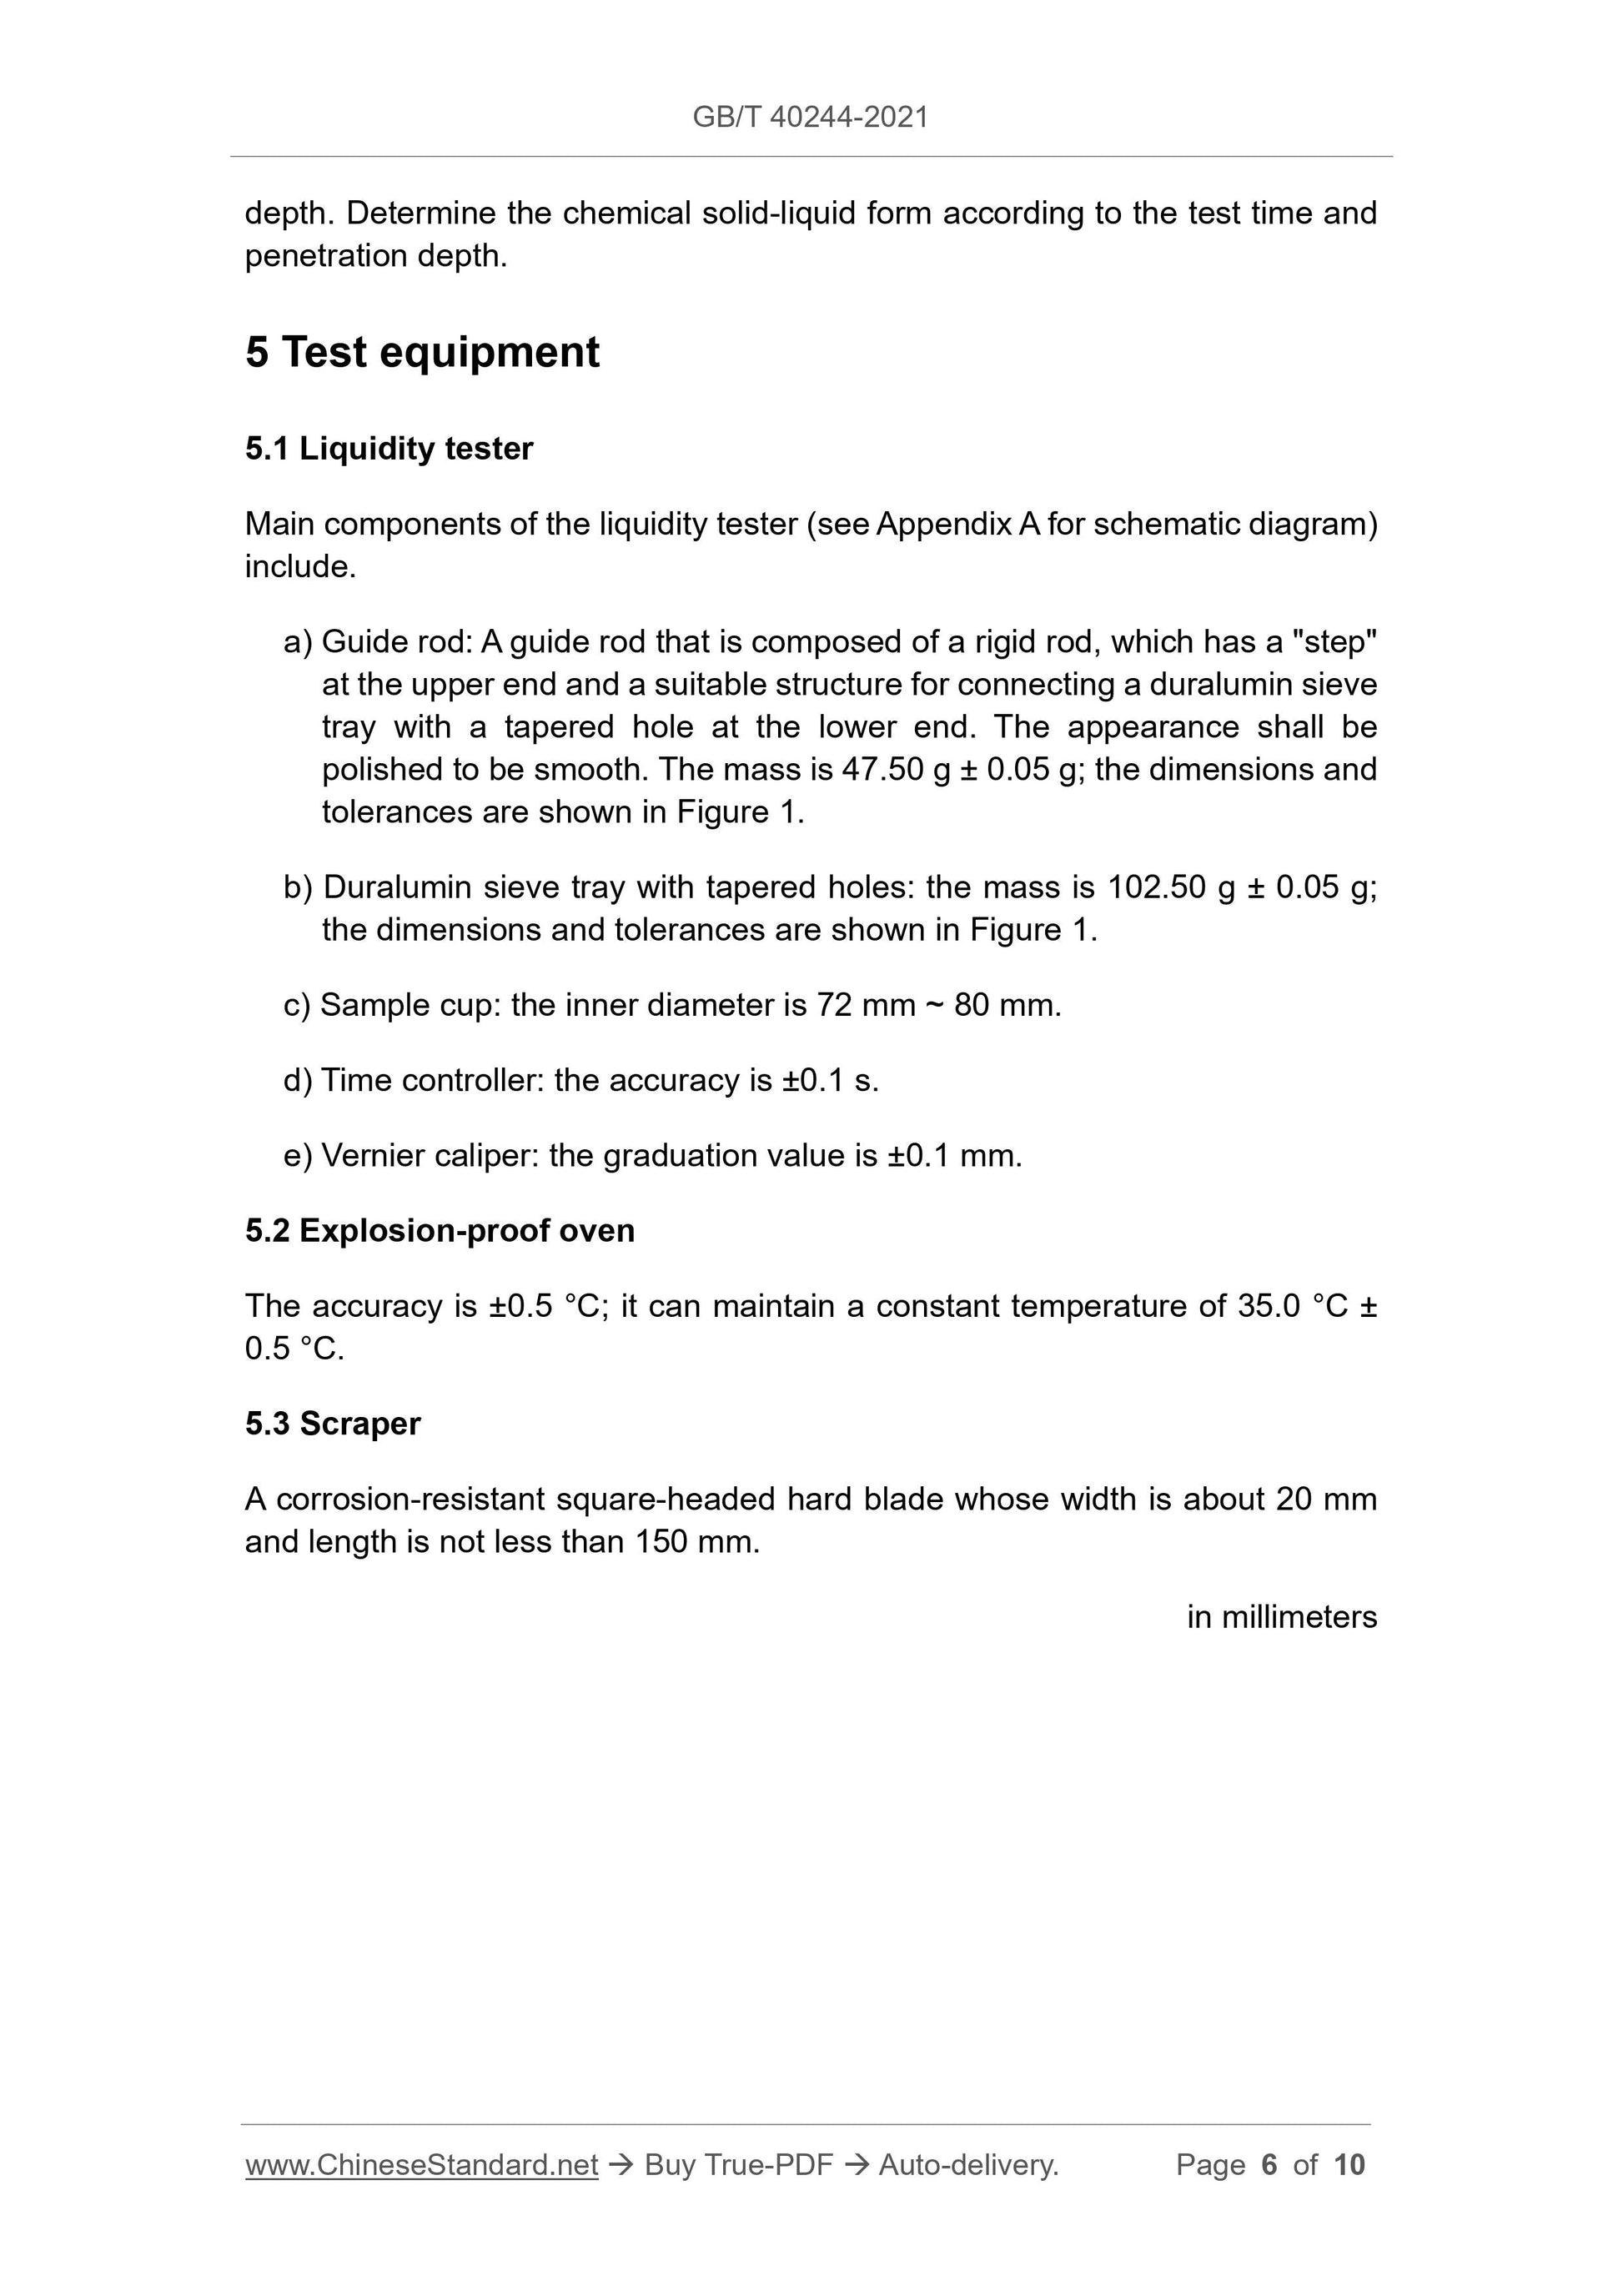 GB/T 40244-2021 Page 4